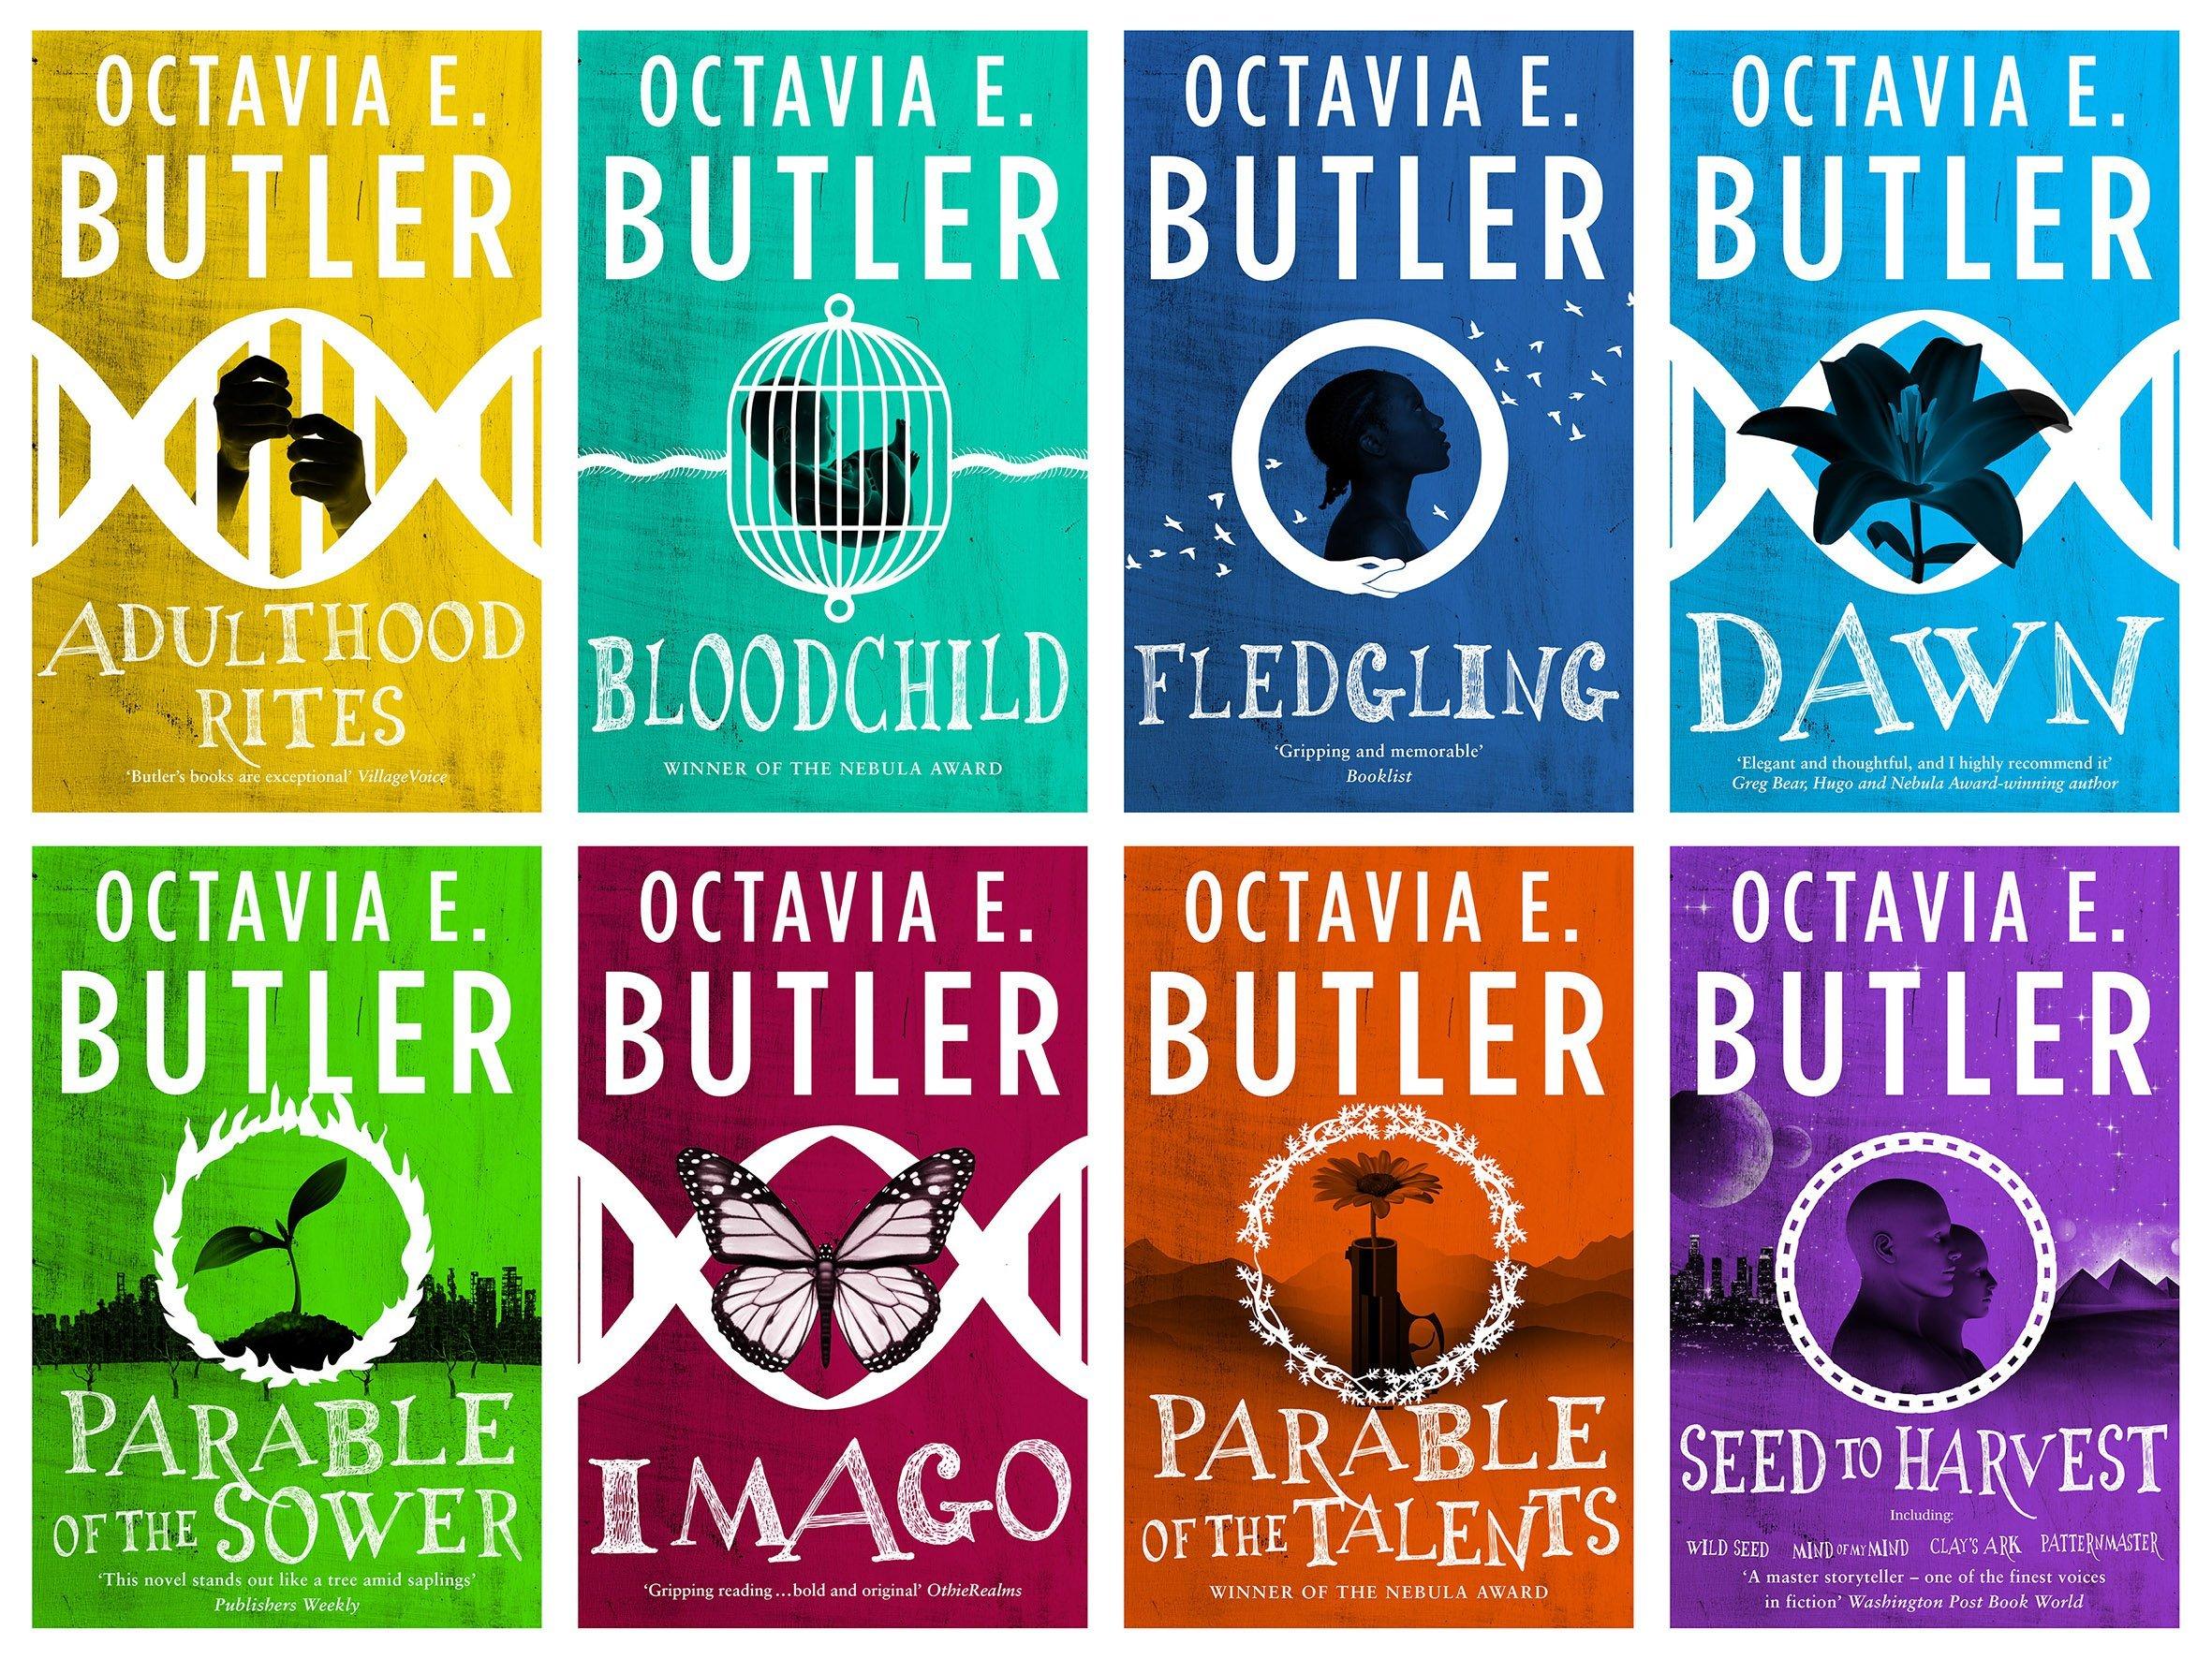 Manager reccomend Octavia butler bisexual